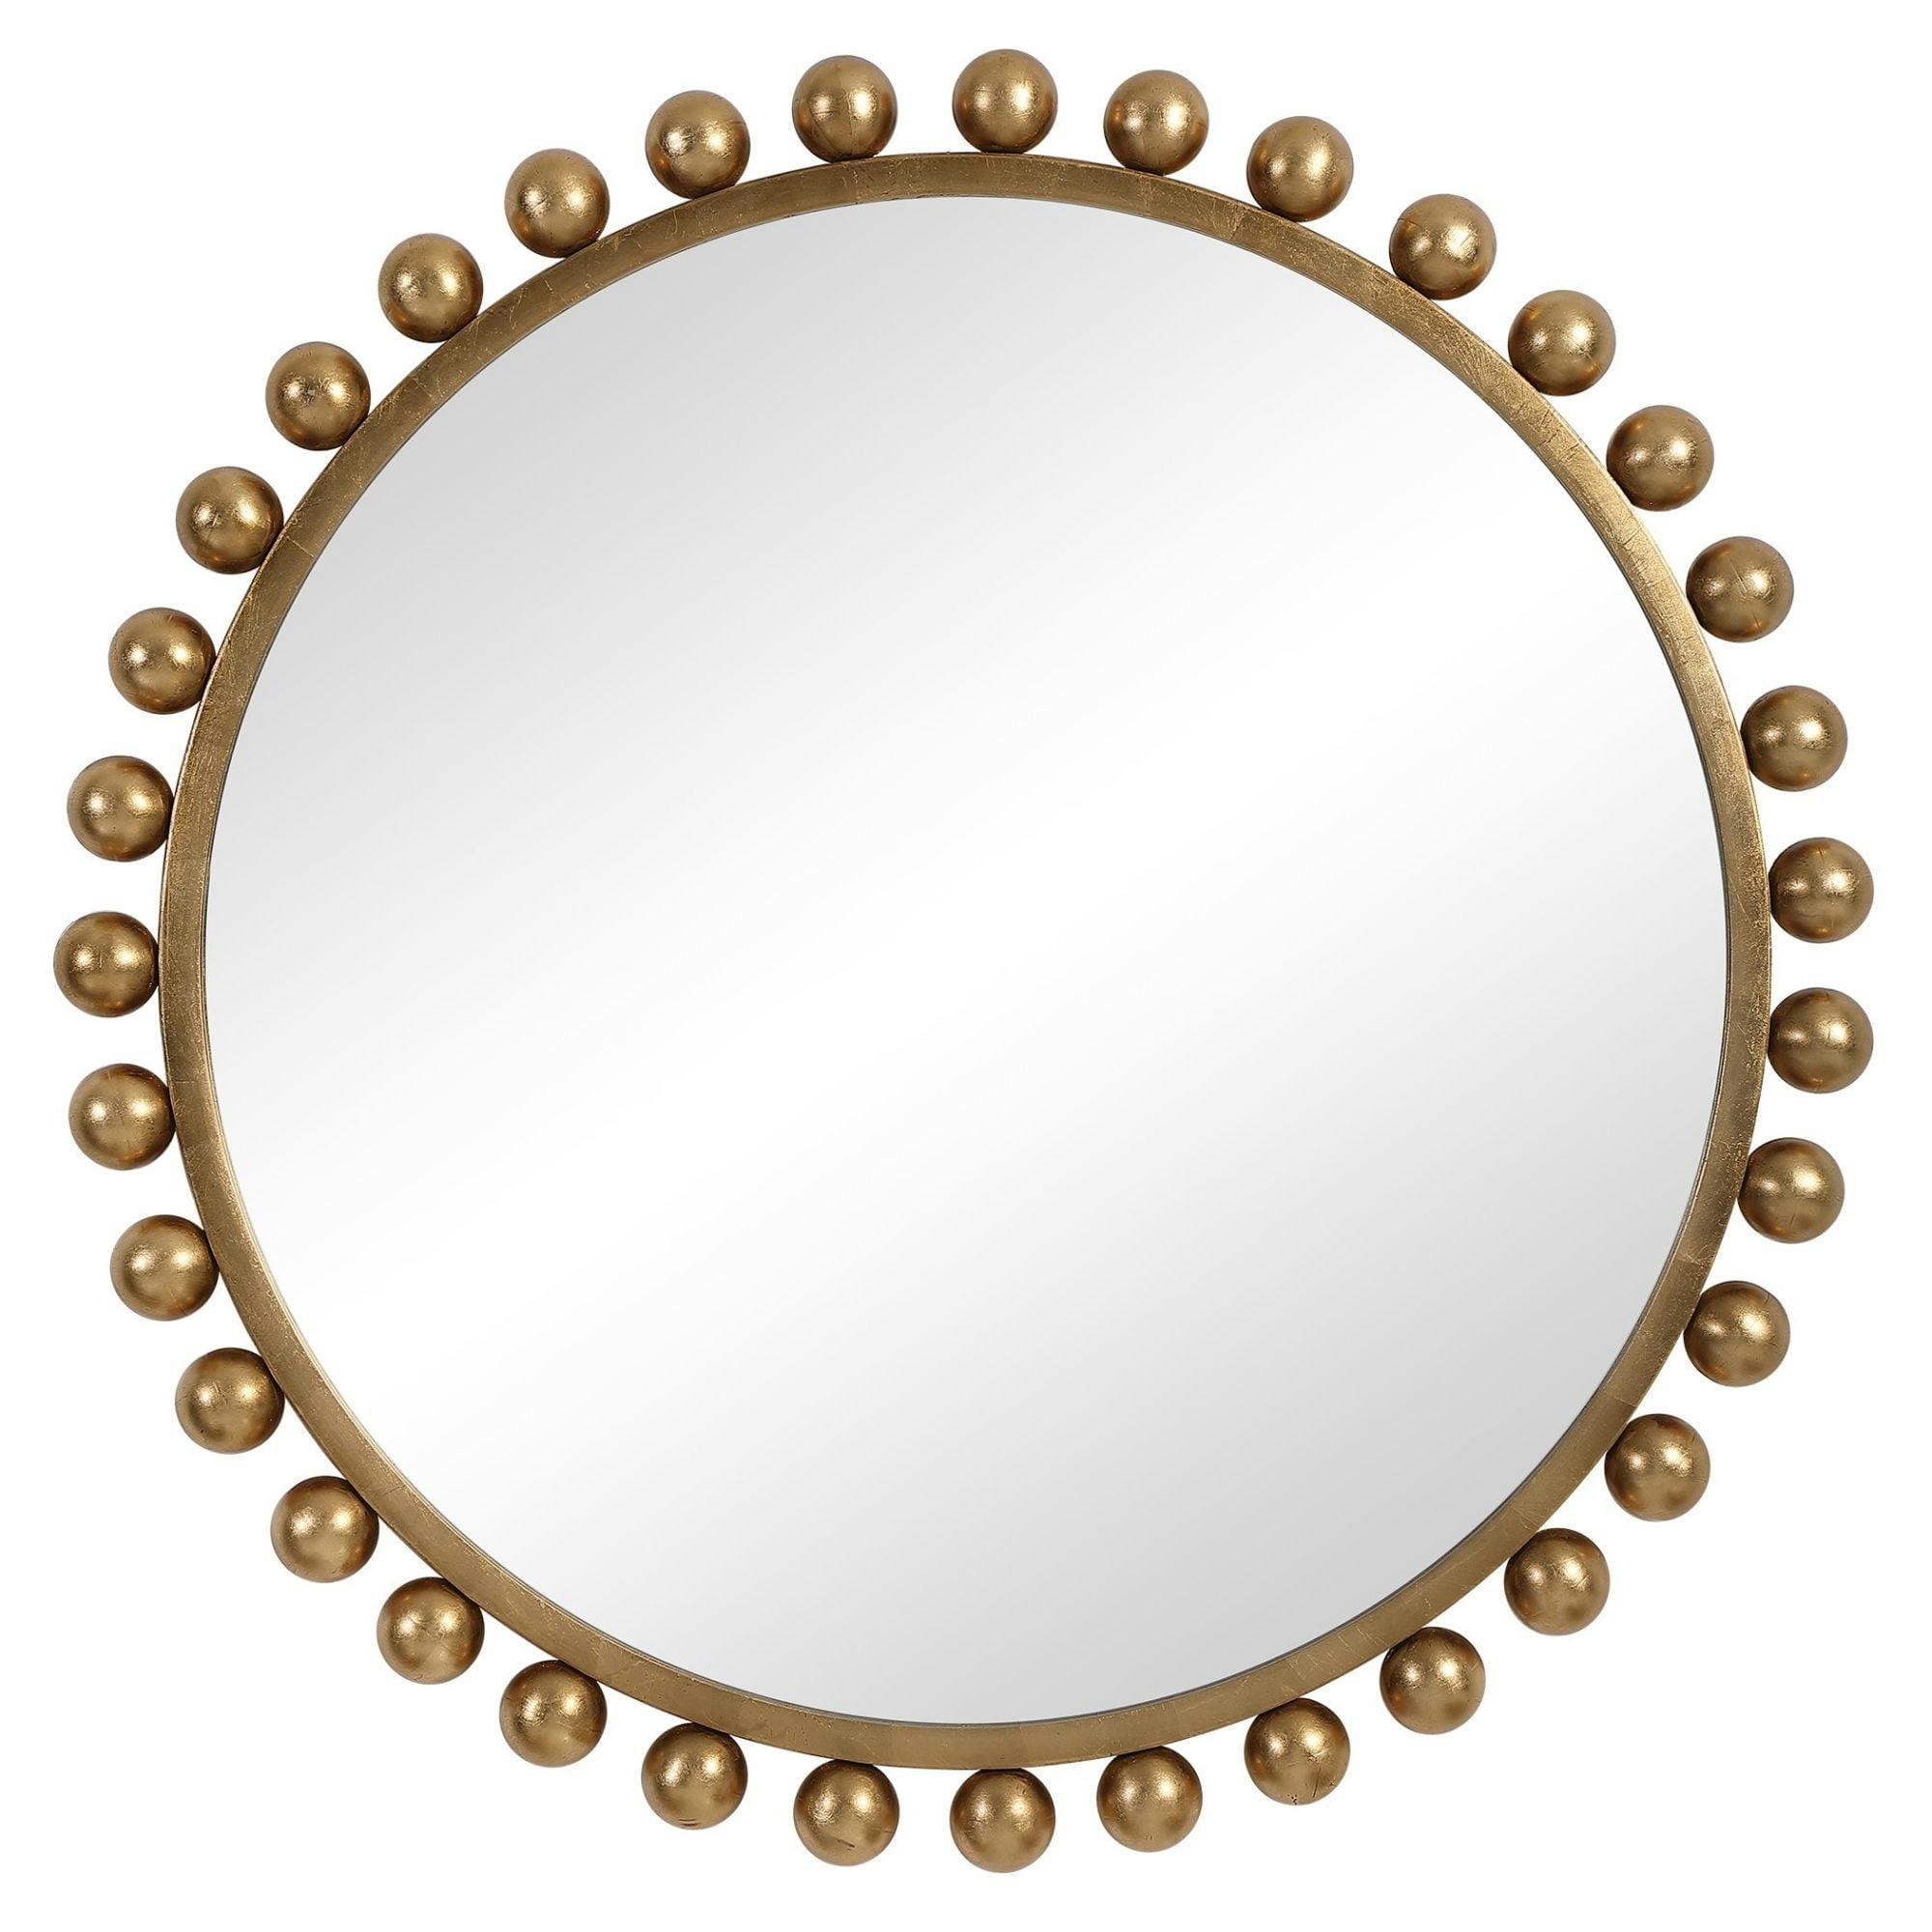 Transitional Gold Leaf Round Wall Mirror with Smooth Iron Spheres, 44"